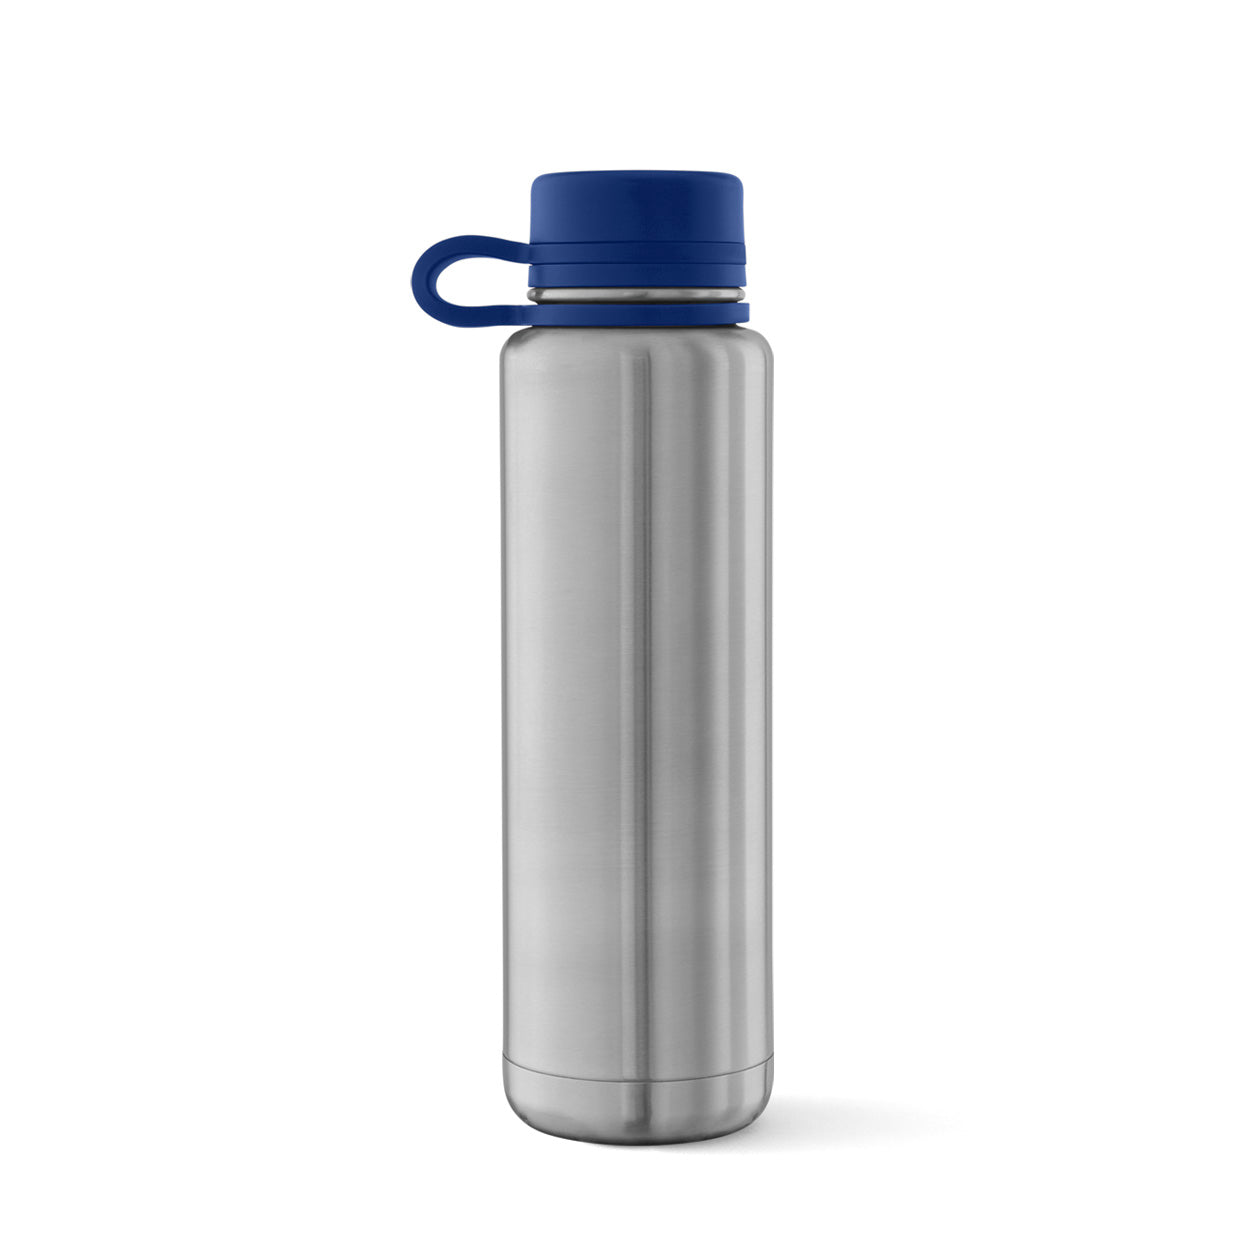 PlanetBox Stainless Steel Water Bottle 532ml - Blue - Little Reef and Friends